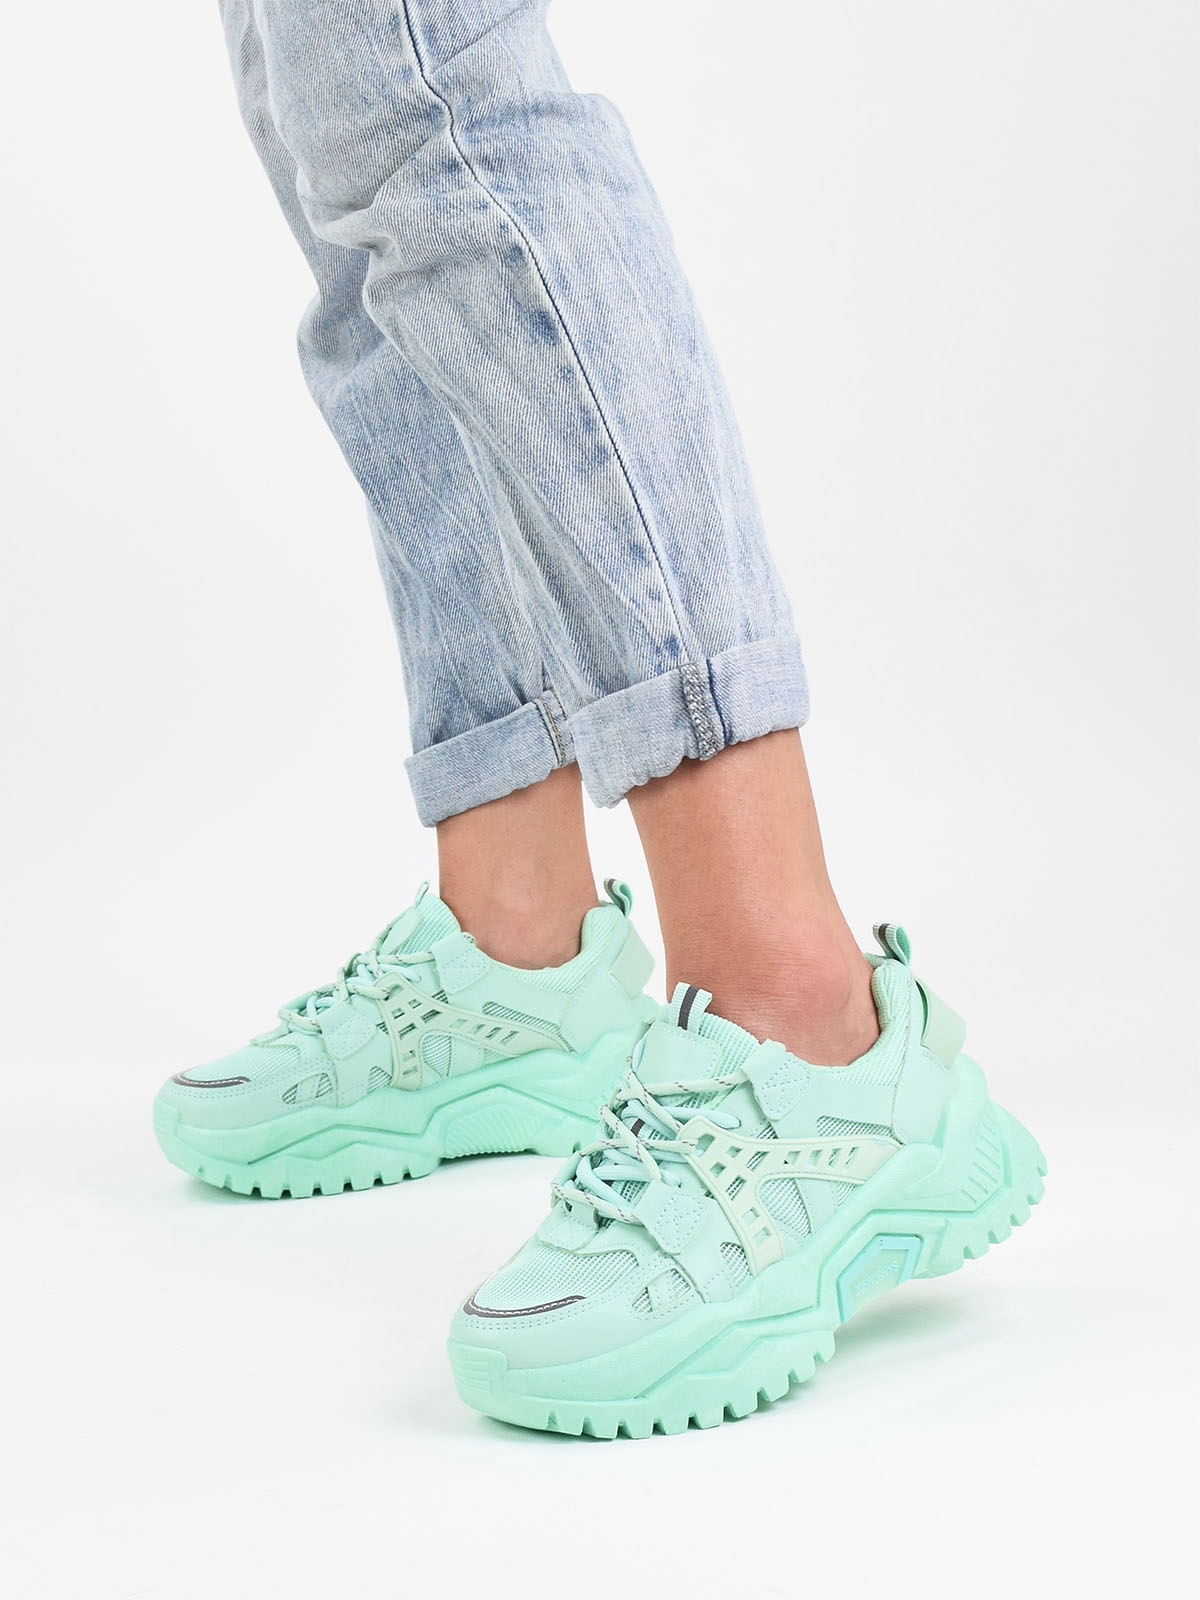 Chunky lace up trainers in mint